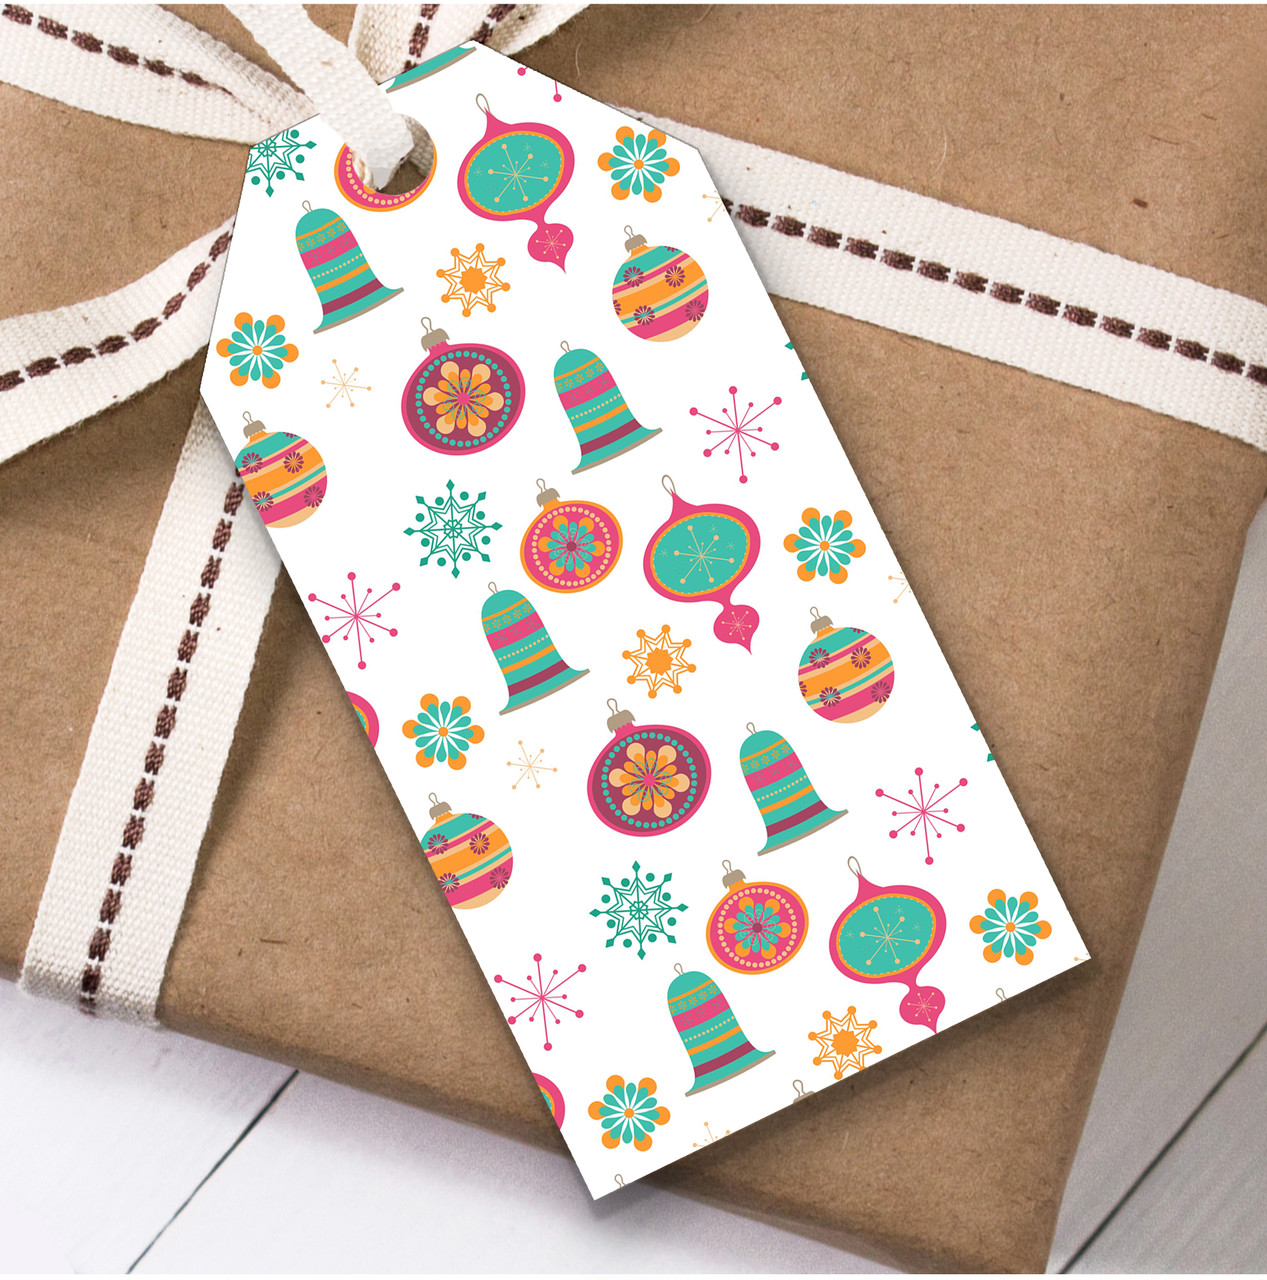 Modern Presents Christmas Gift Tags - Red Heart Print